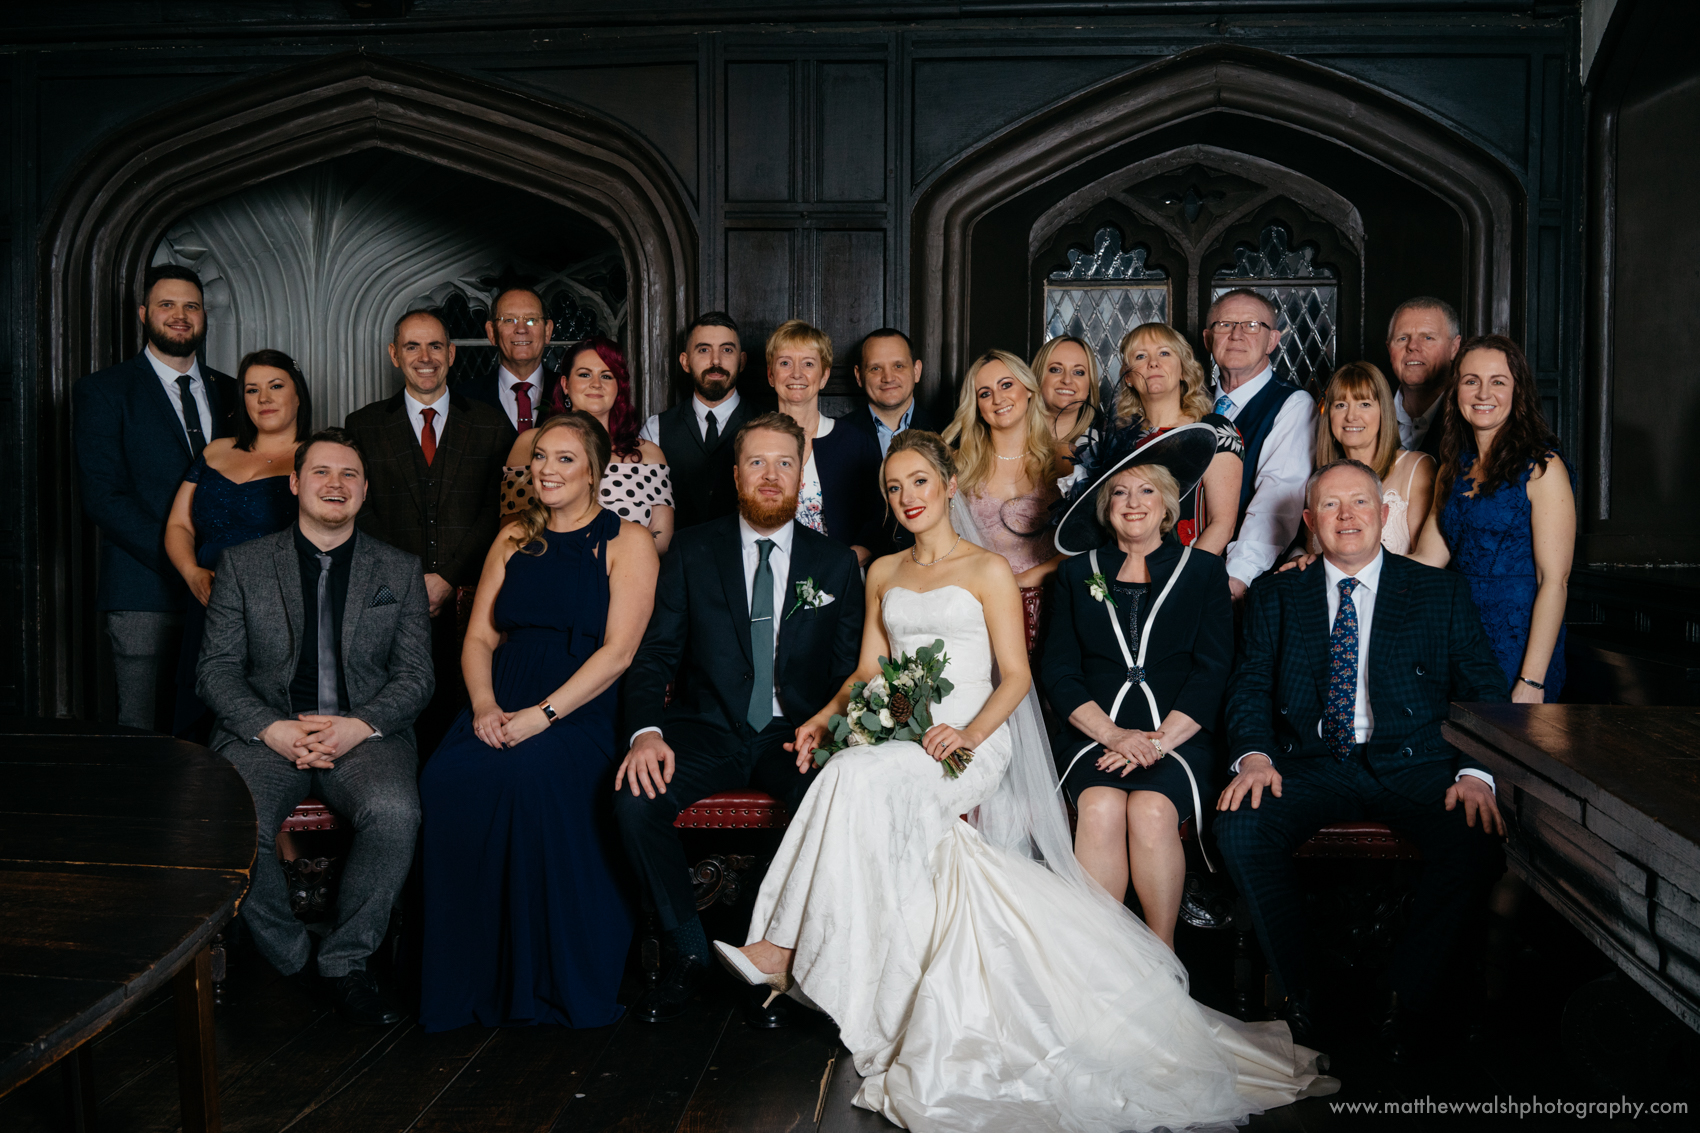 A wedding is the perfect time for a family portrait